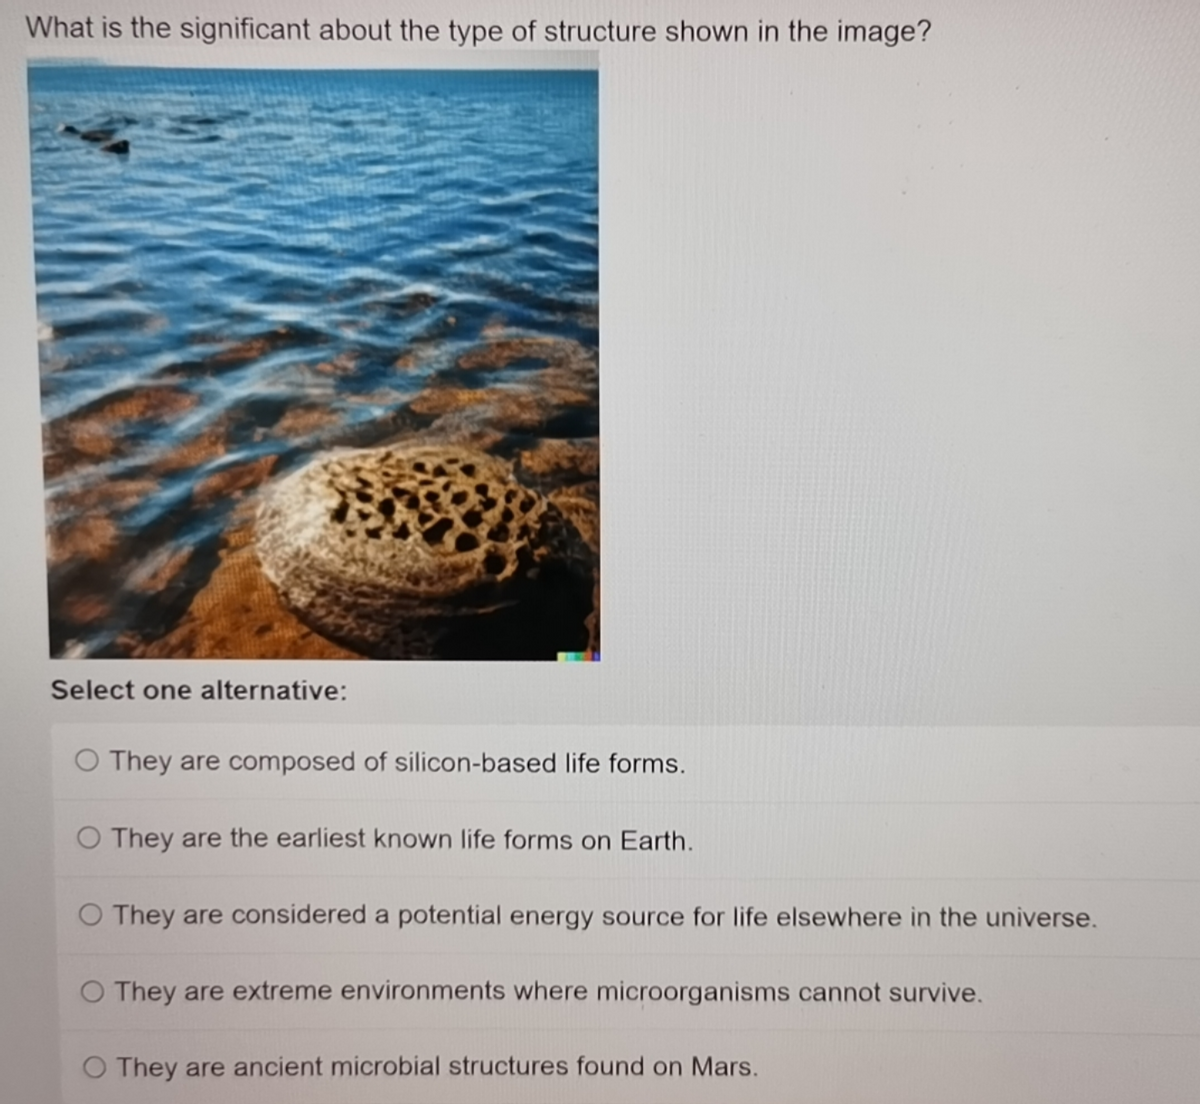 What is the significant about the type of structure shown in the image?
Select one alternative:
O They are composed of silicon-based life forms.
O They are the earliest known life forms on Earth.
O They are considered a potential energy source for life elsewhere in the universe.
O They are extreme environments where microorganisms cannot survive.
O They are ancient microbial structures found on Mars.